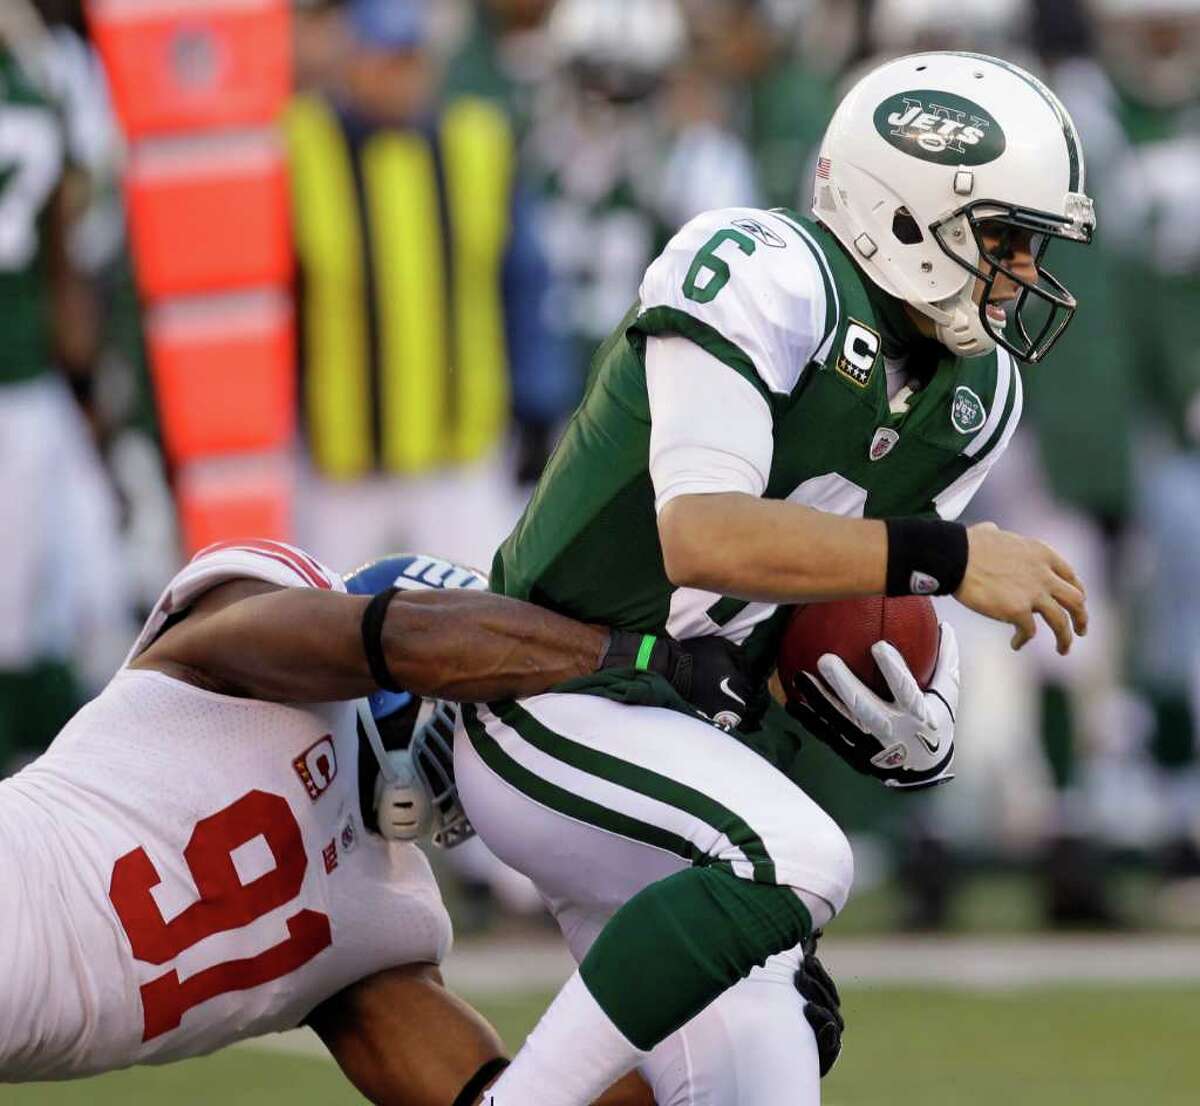 New York Jets quarterback Mark Sanchez, right, is sacked by New York Giants' Justin Tuck (91) during the third quarter of an NFL football game Saturday, Dec. 24, 2011, in East Rutherford, N.J. (AP Photo/Julio Cortez)